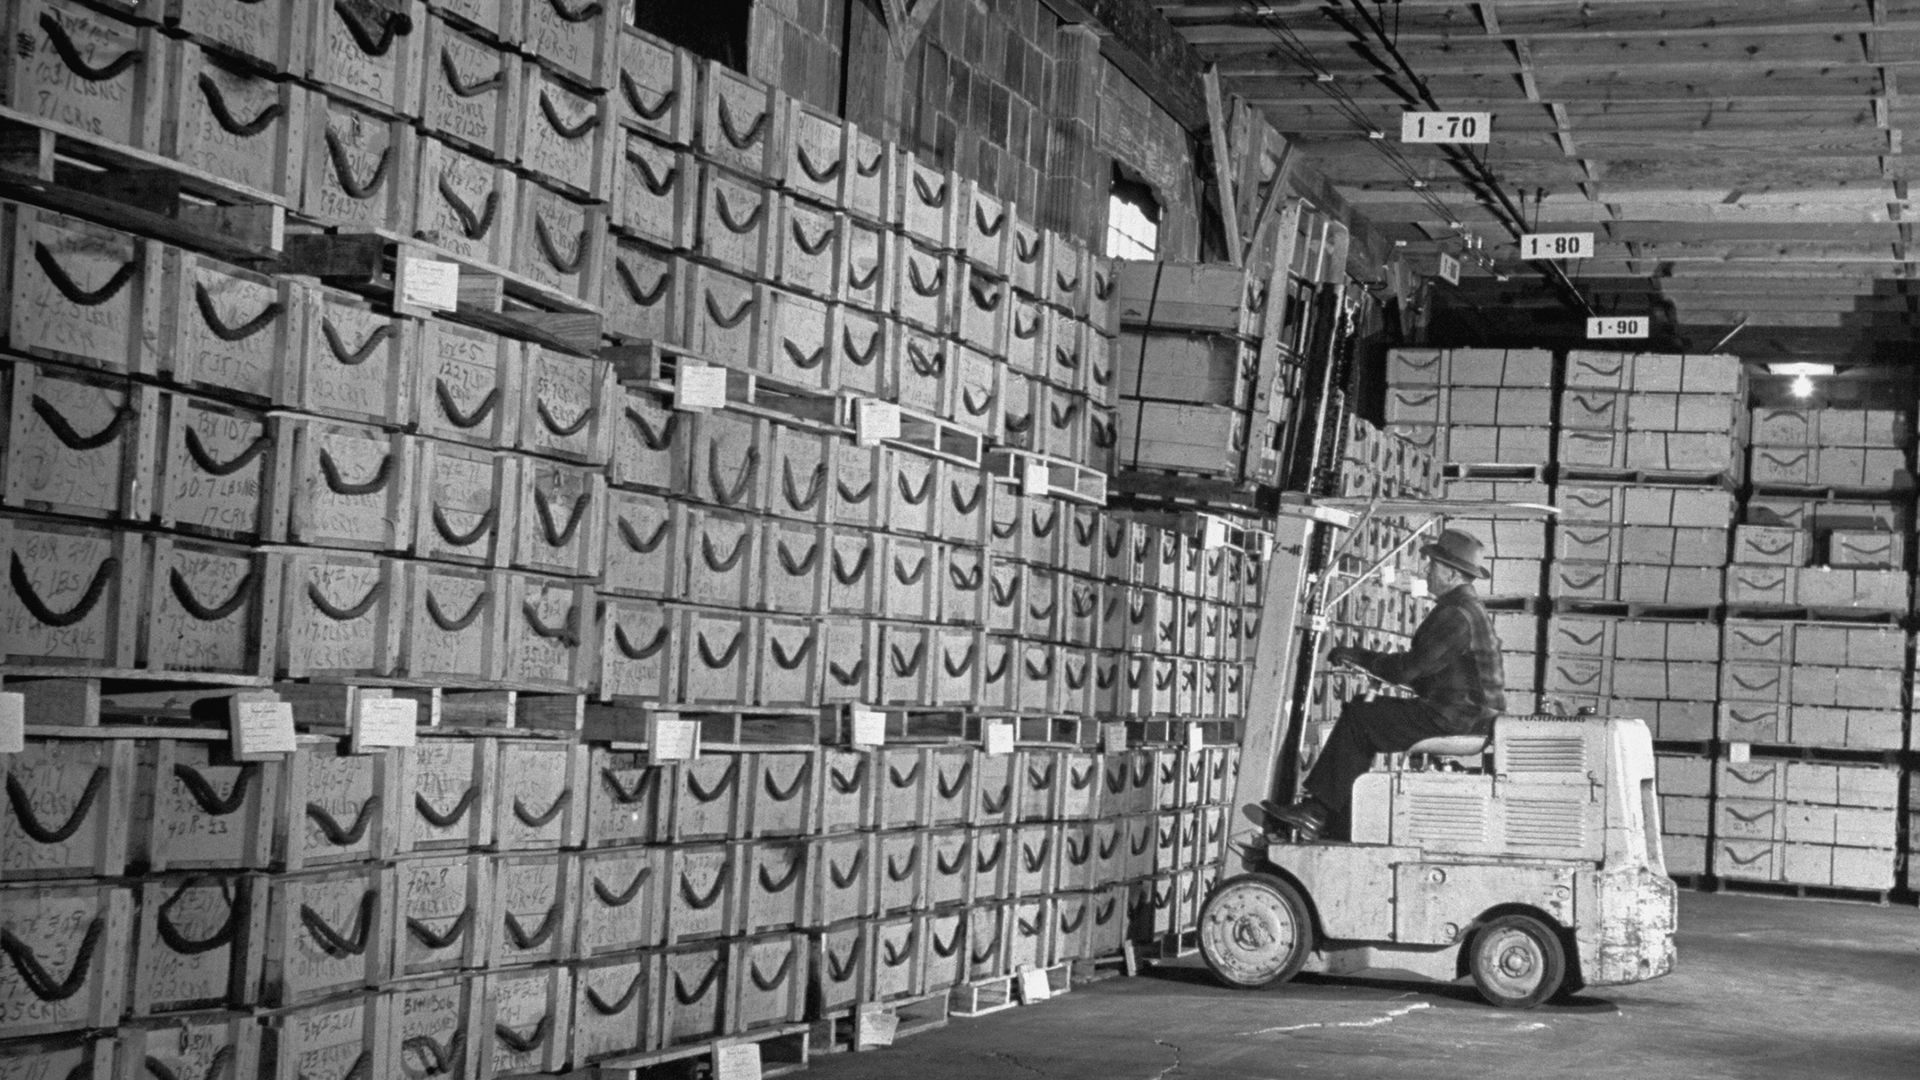 A forklift operator lifts crates full of quartz crystals in this photo from 1948.